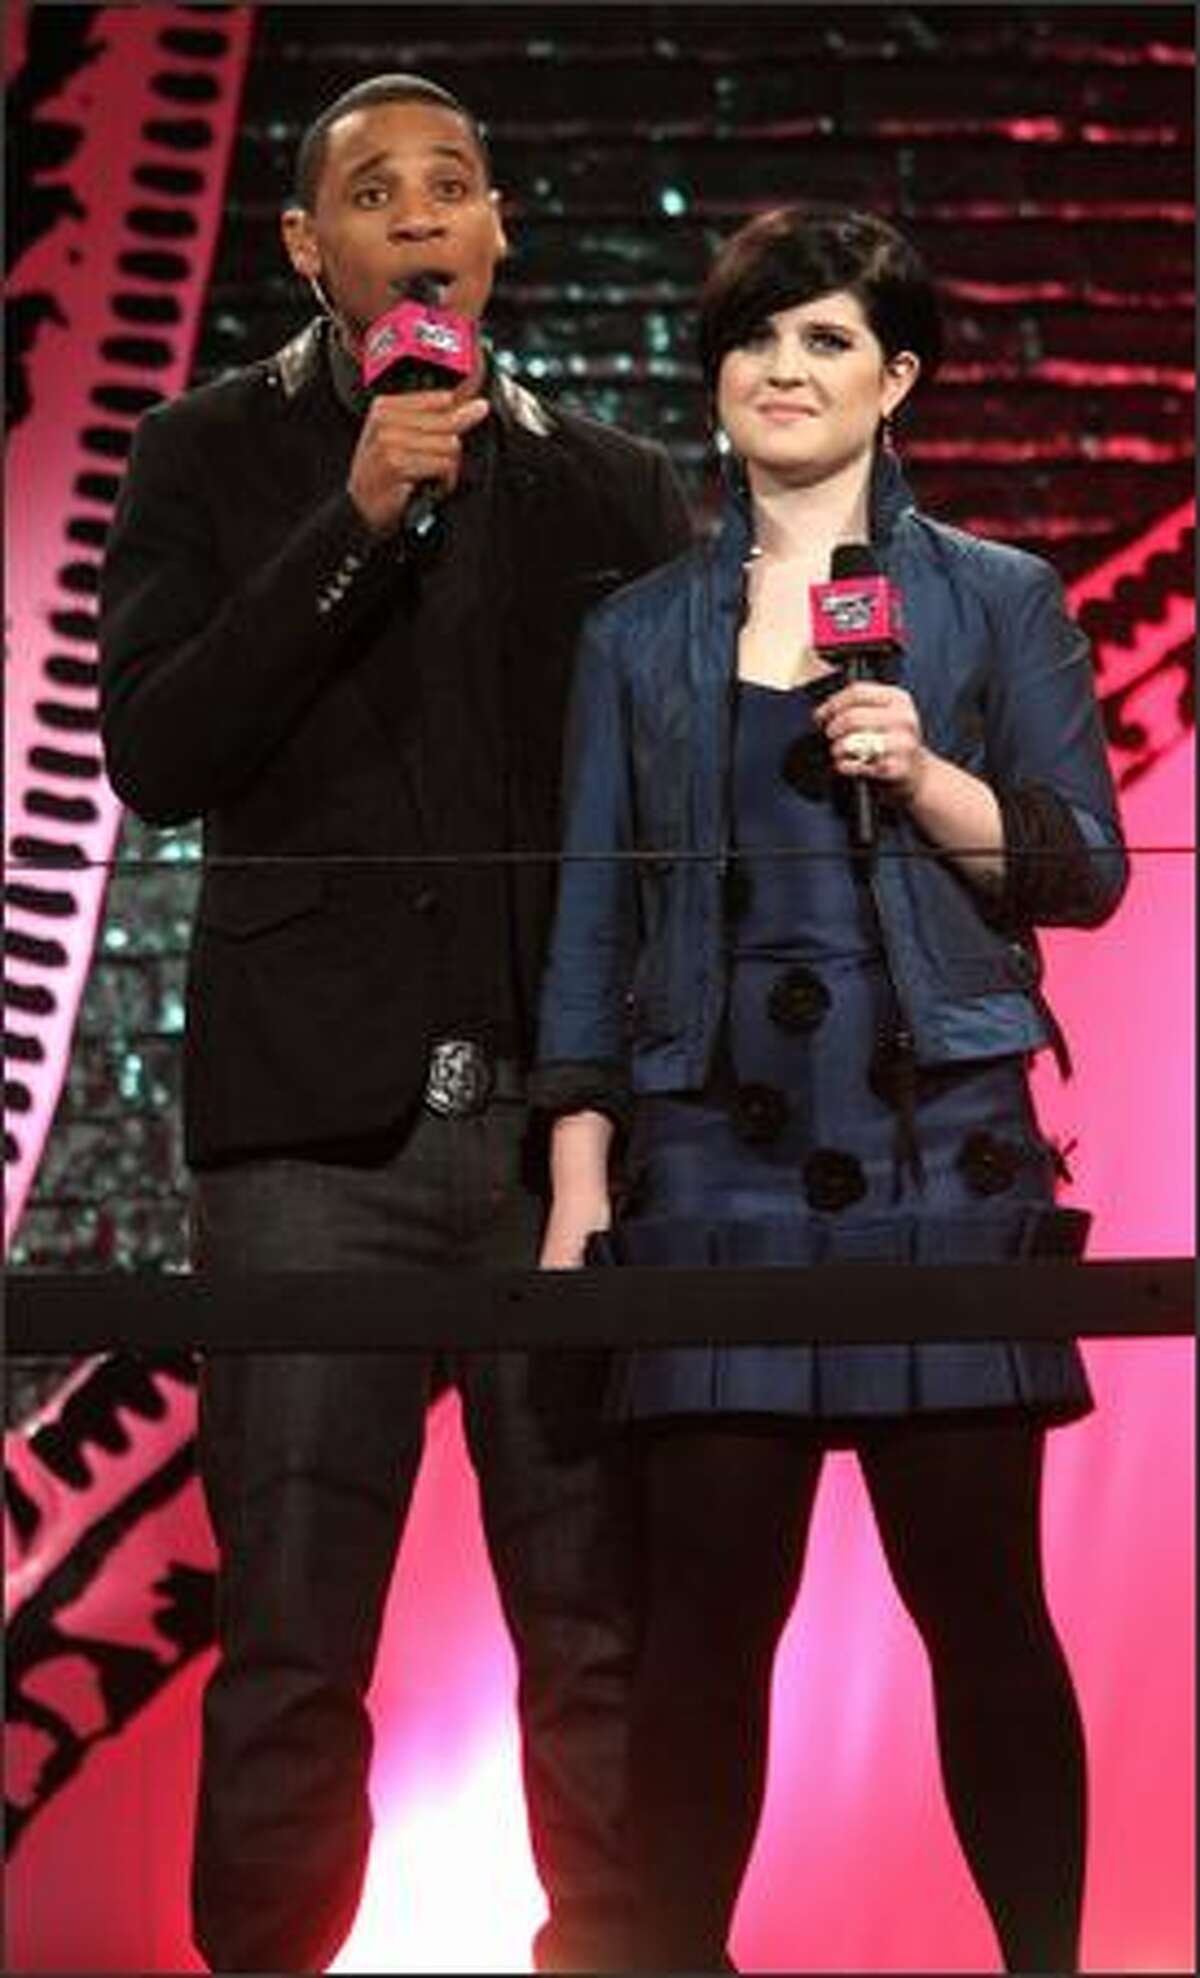 Hosts Reggie Yates and Kelly Osbourne present artists on stage at the BRITs Nominations Launch Party at the Roundhouse, Camden in London, England.